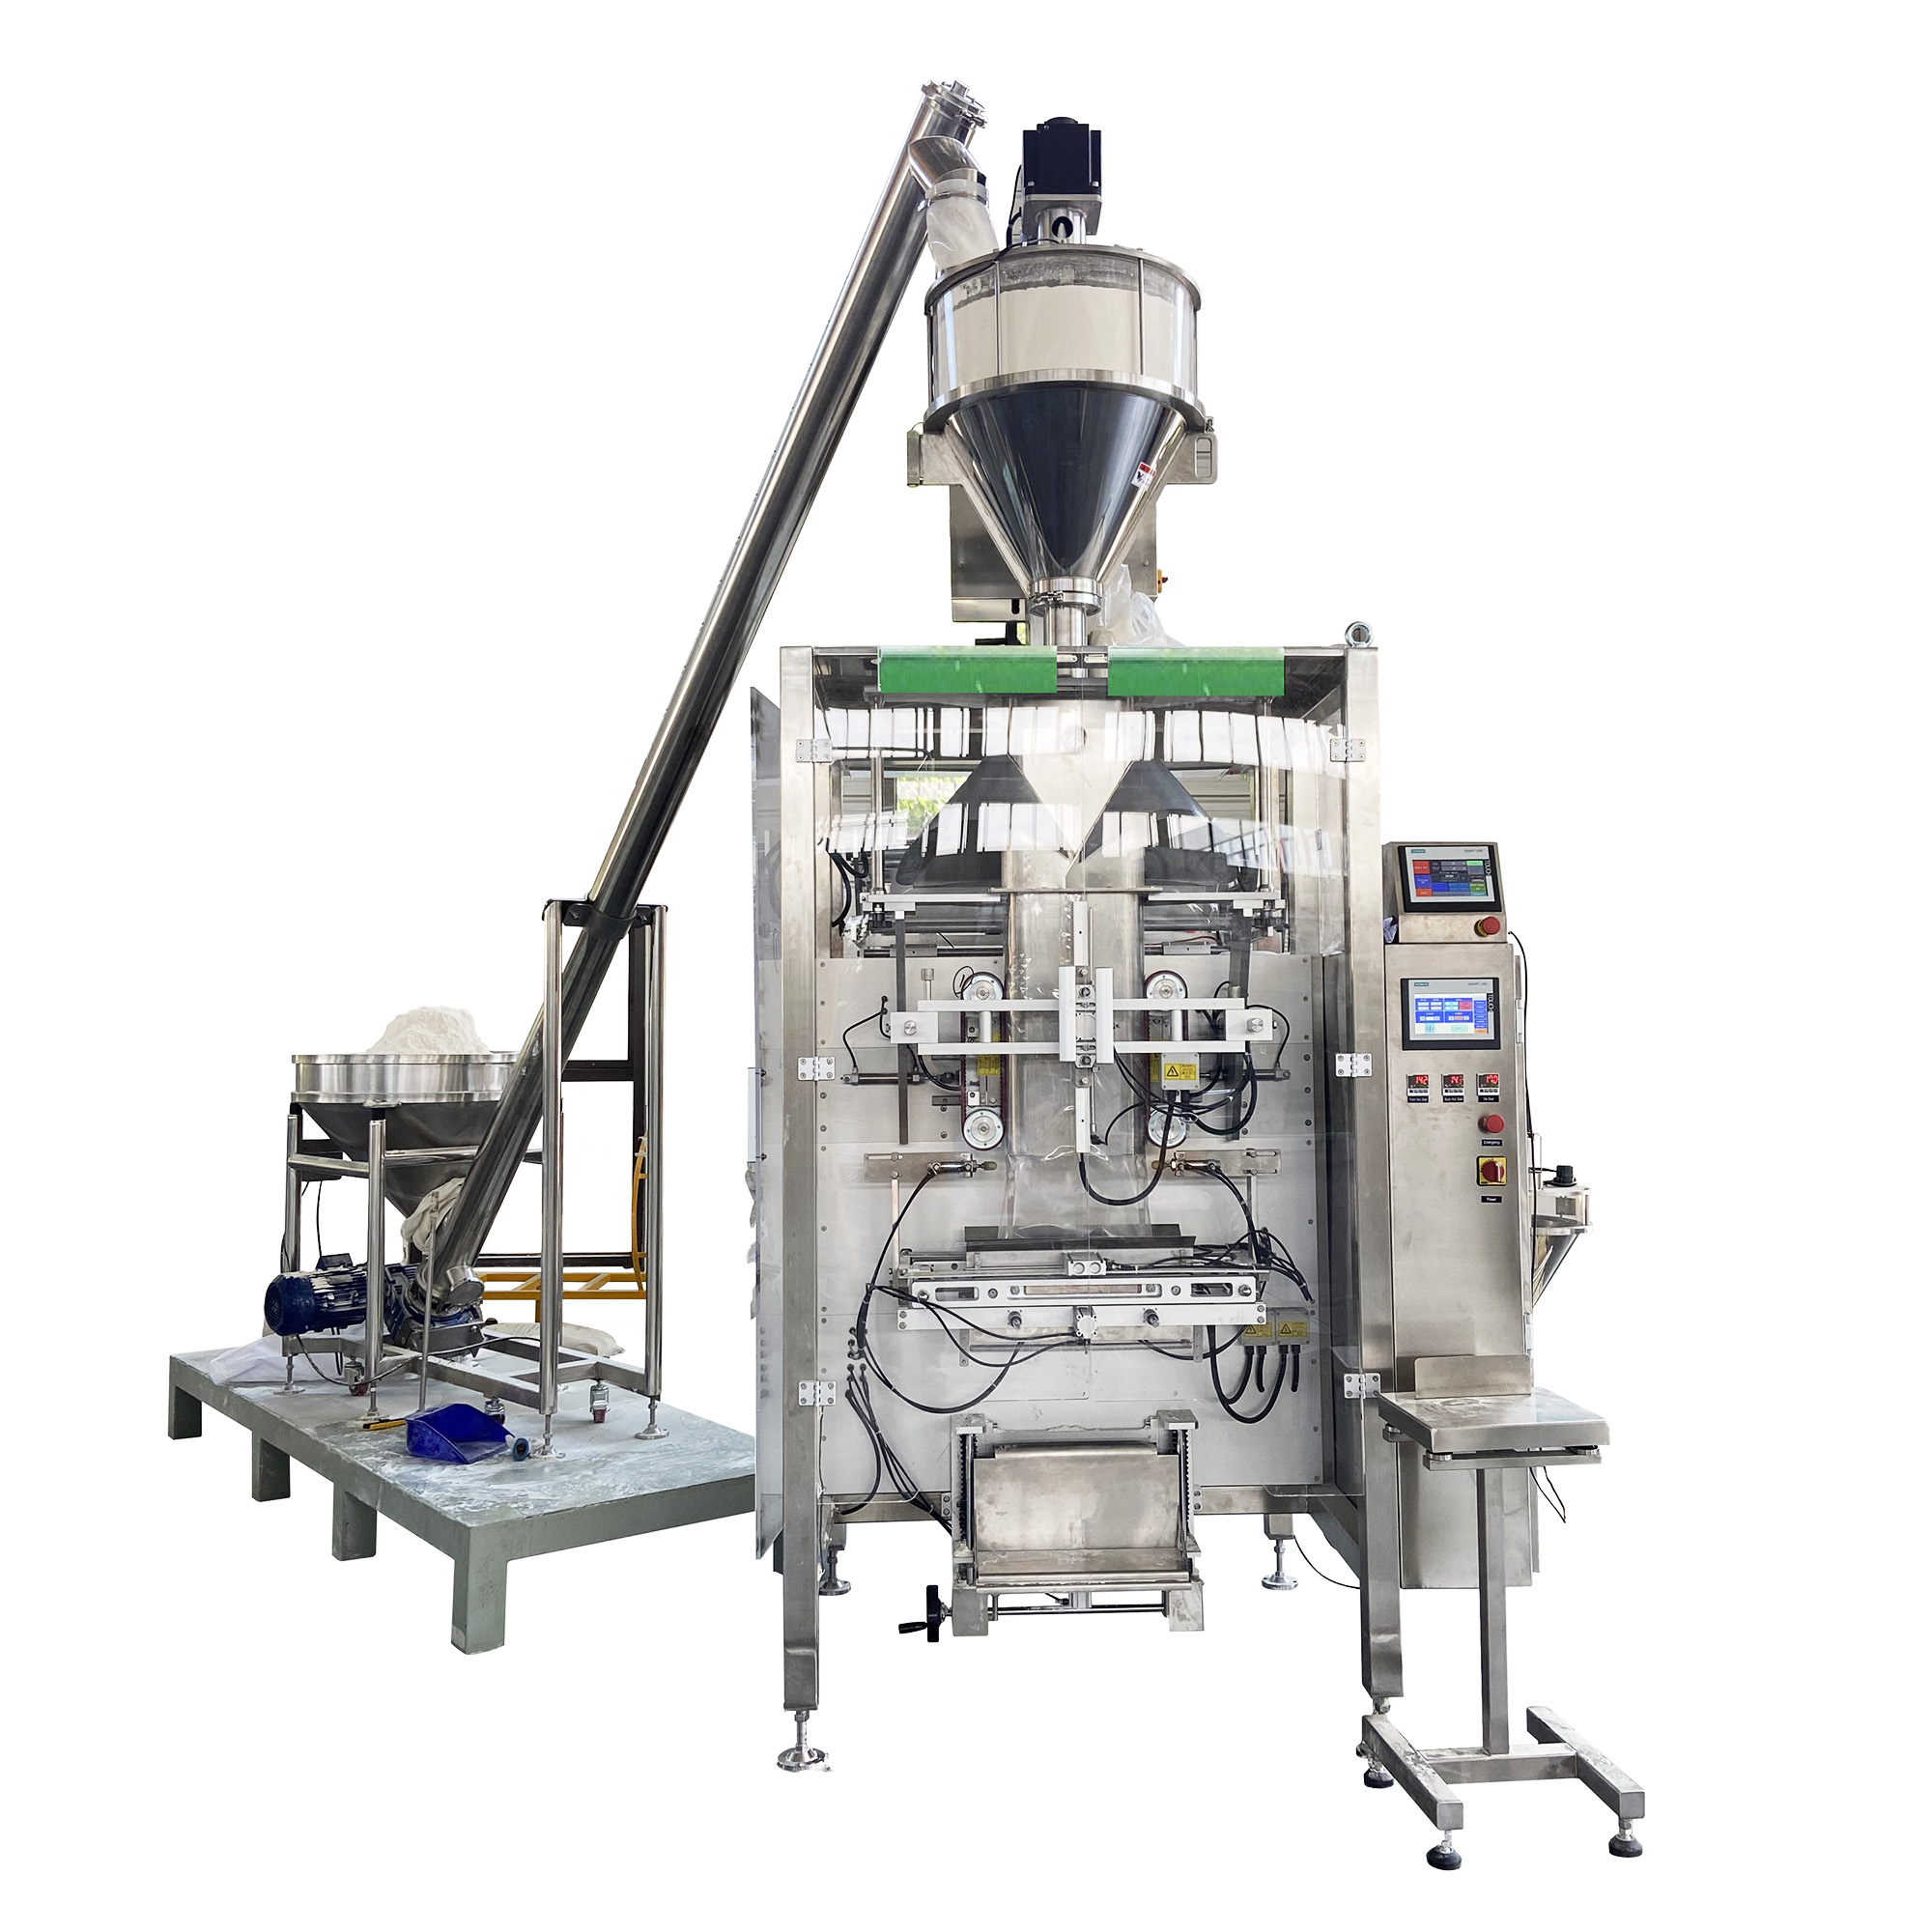 VFS5000B Powdery Materials VFFS Bagging Machine with Auger Filler